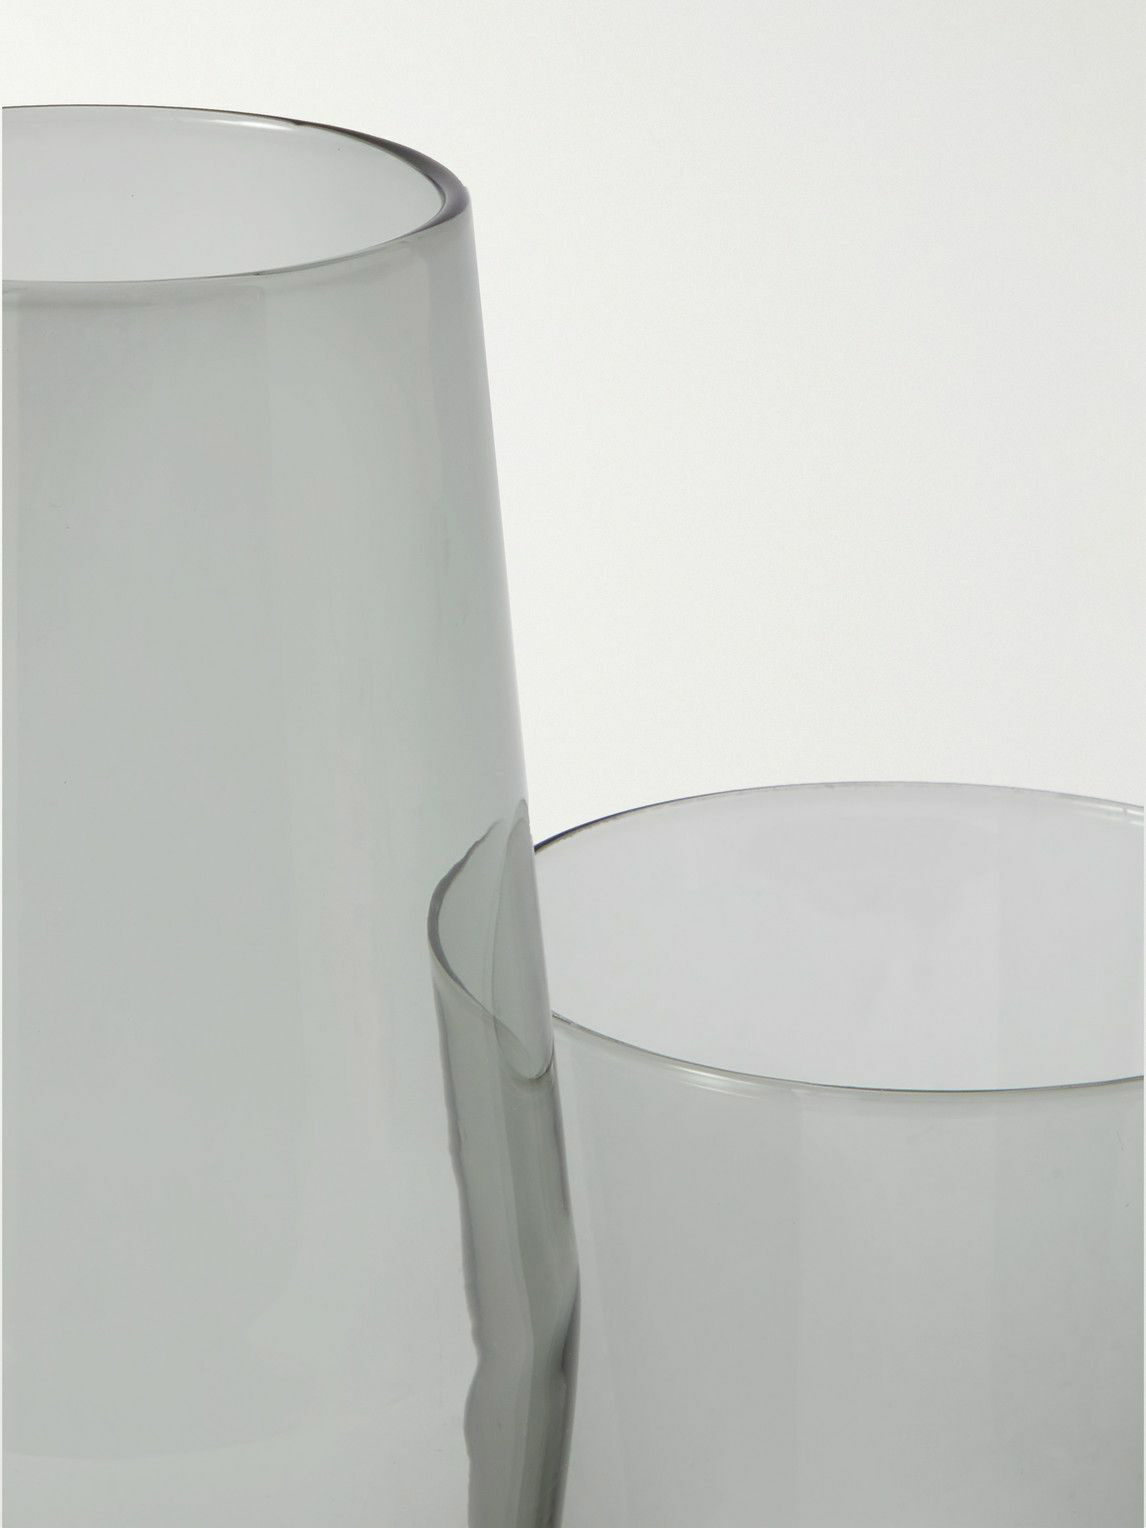 R+D.LAB Luisa Carafe and Glass Set for Men